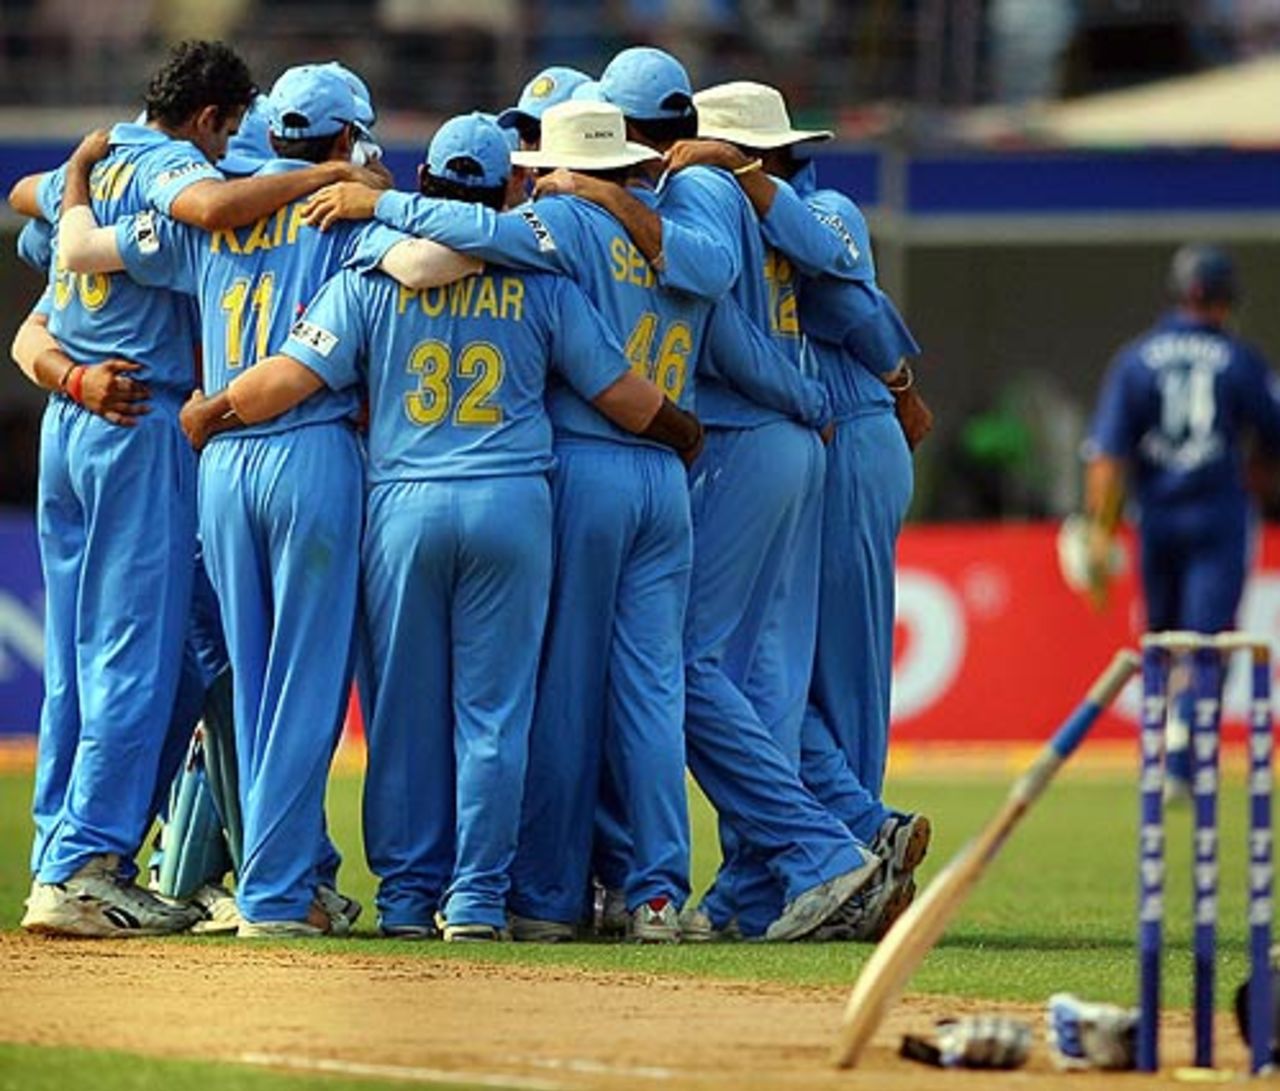 The Indians huddle after the fall of Andrew Strauss, India v England, 4th ODI, Kochi, April 6, 2006